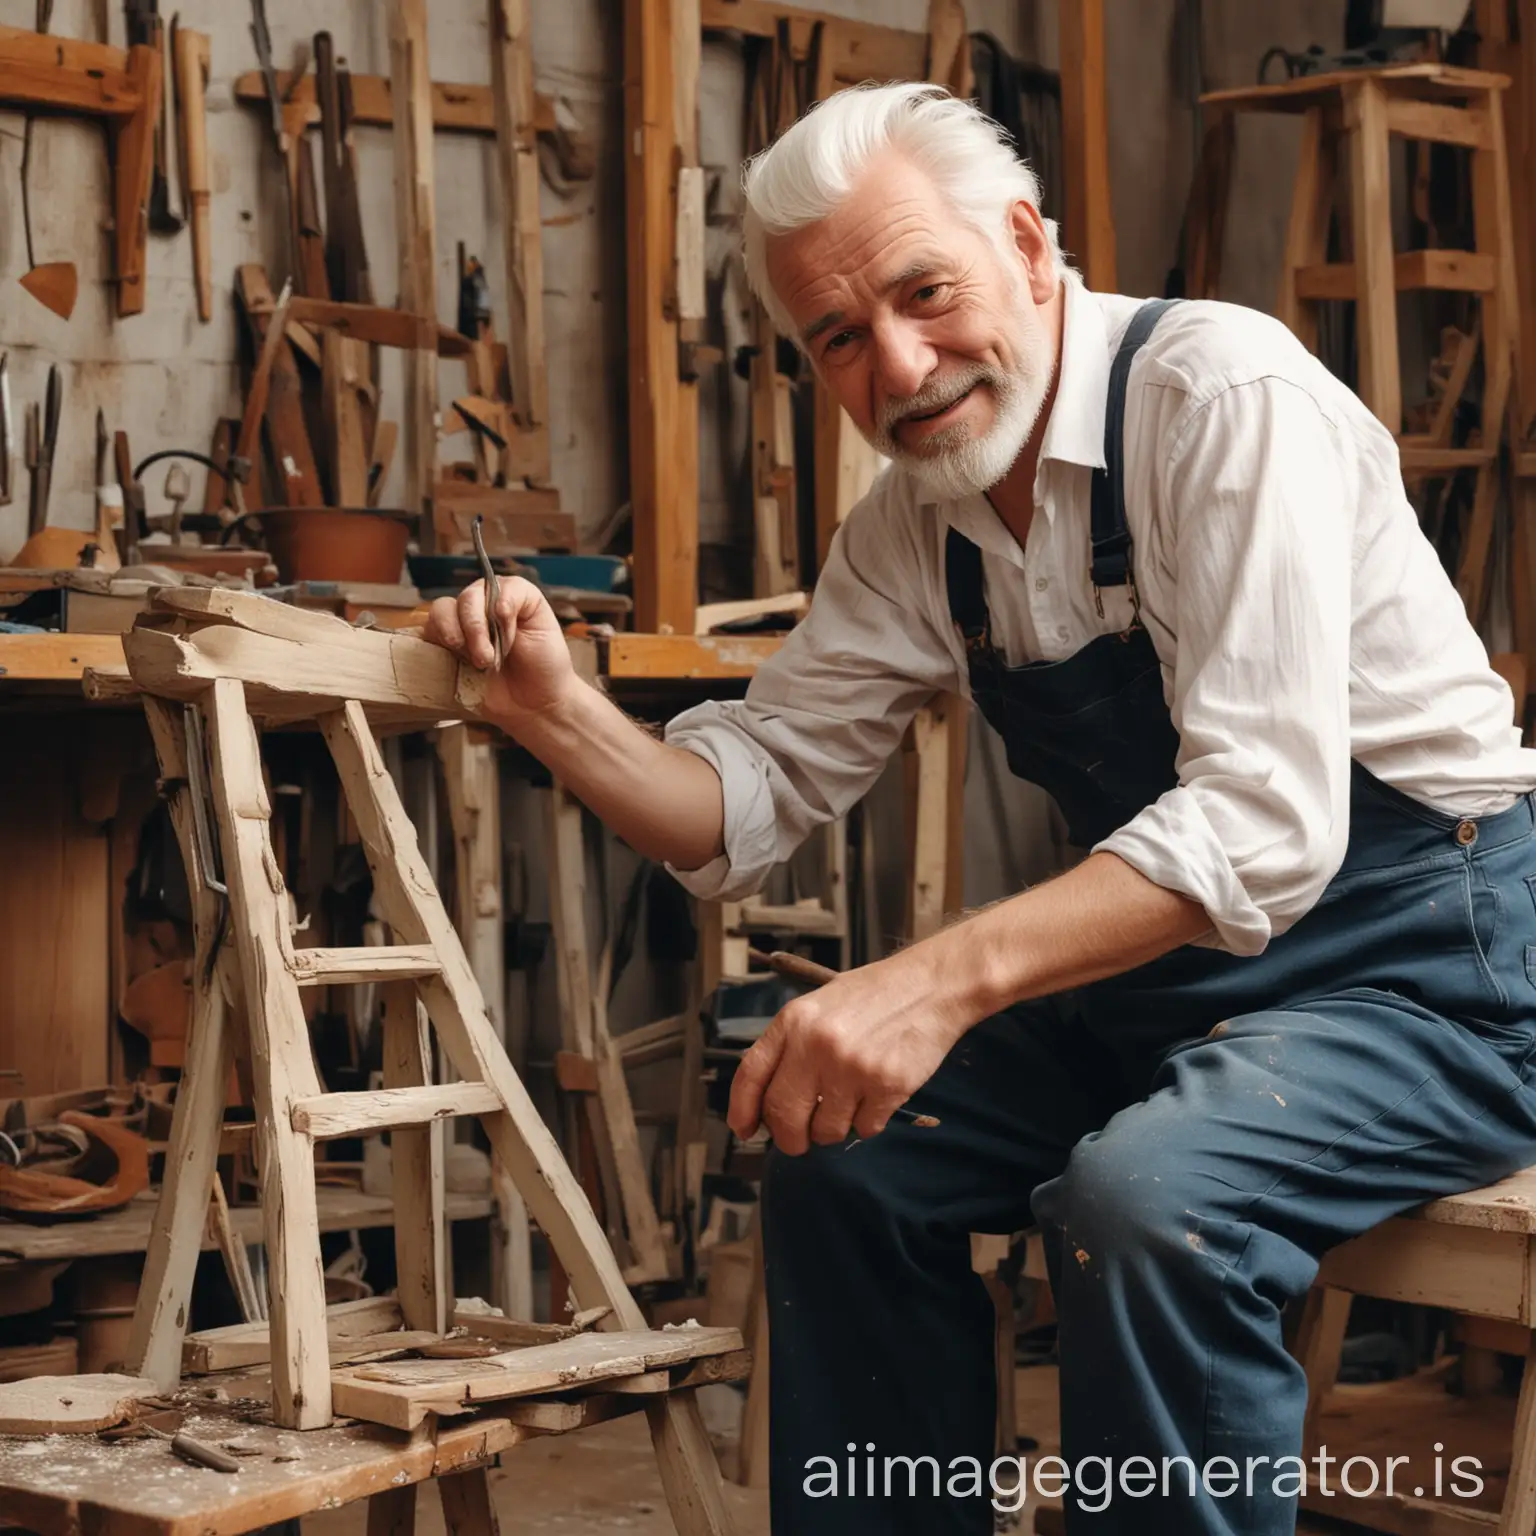 Upright format: An old man with white hair, sits on a workbench and repairs a broken chair. He is very happy and motivated to work on it.